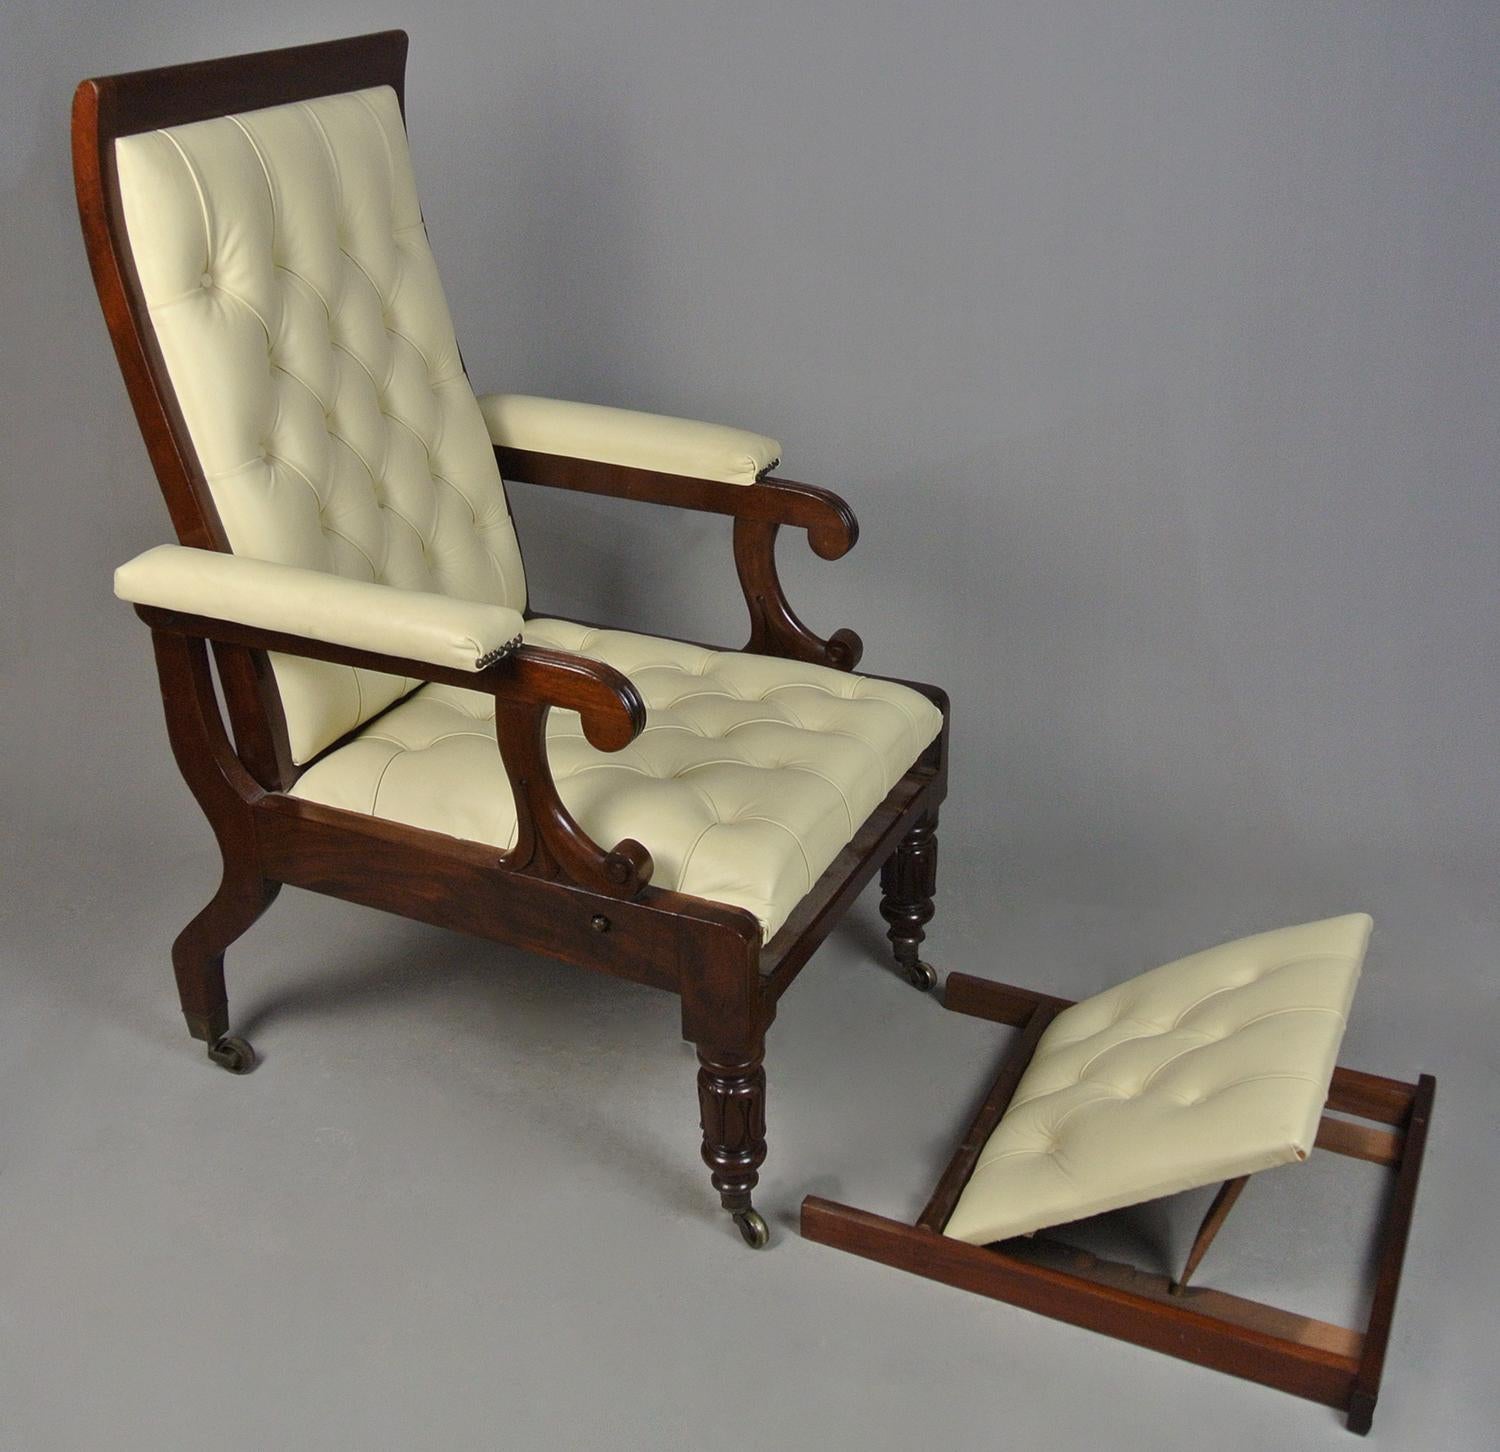 19th Century Regency Solid Mahogany ‘Daws Patent’ Reclining Chair c. 1830 For Sale